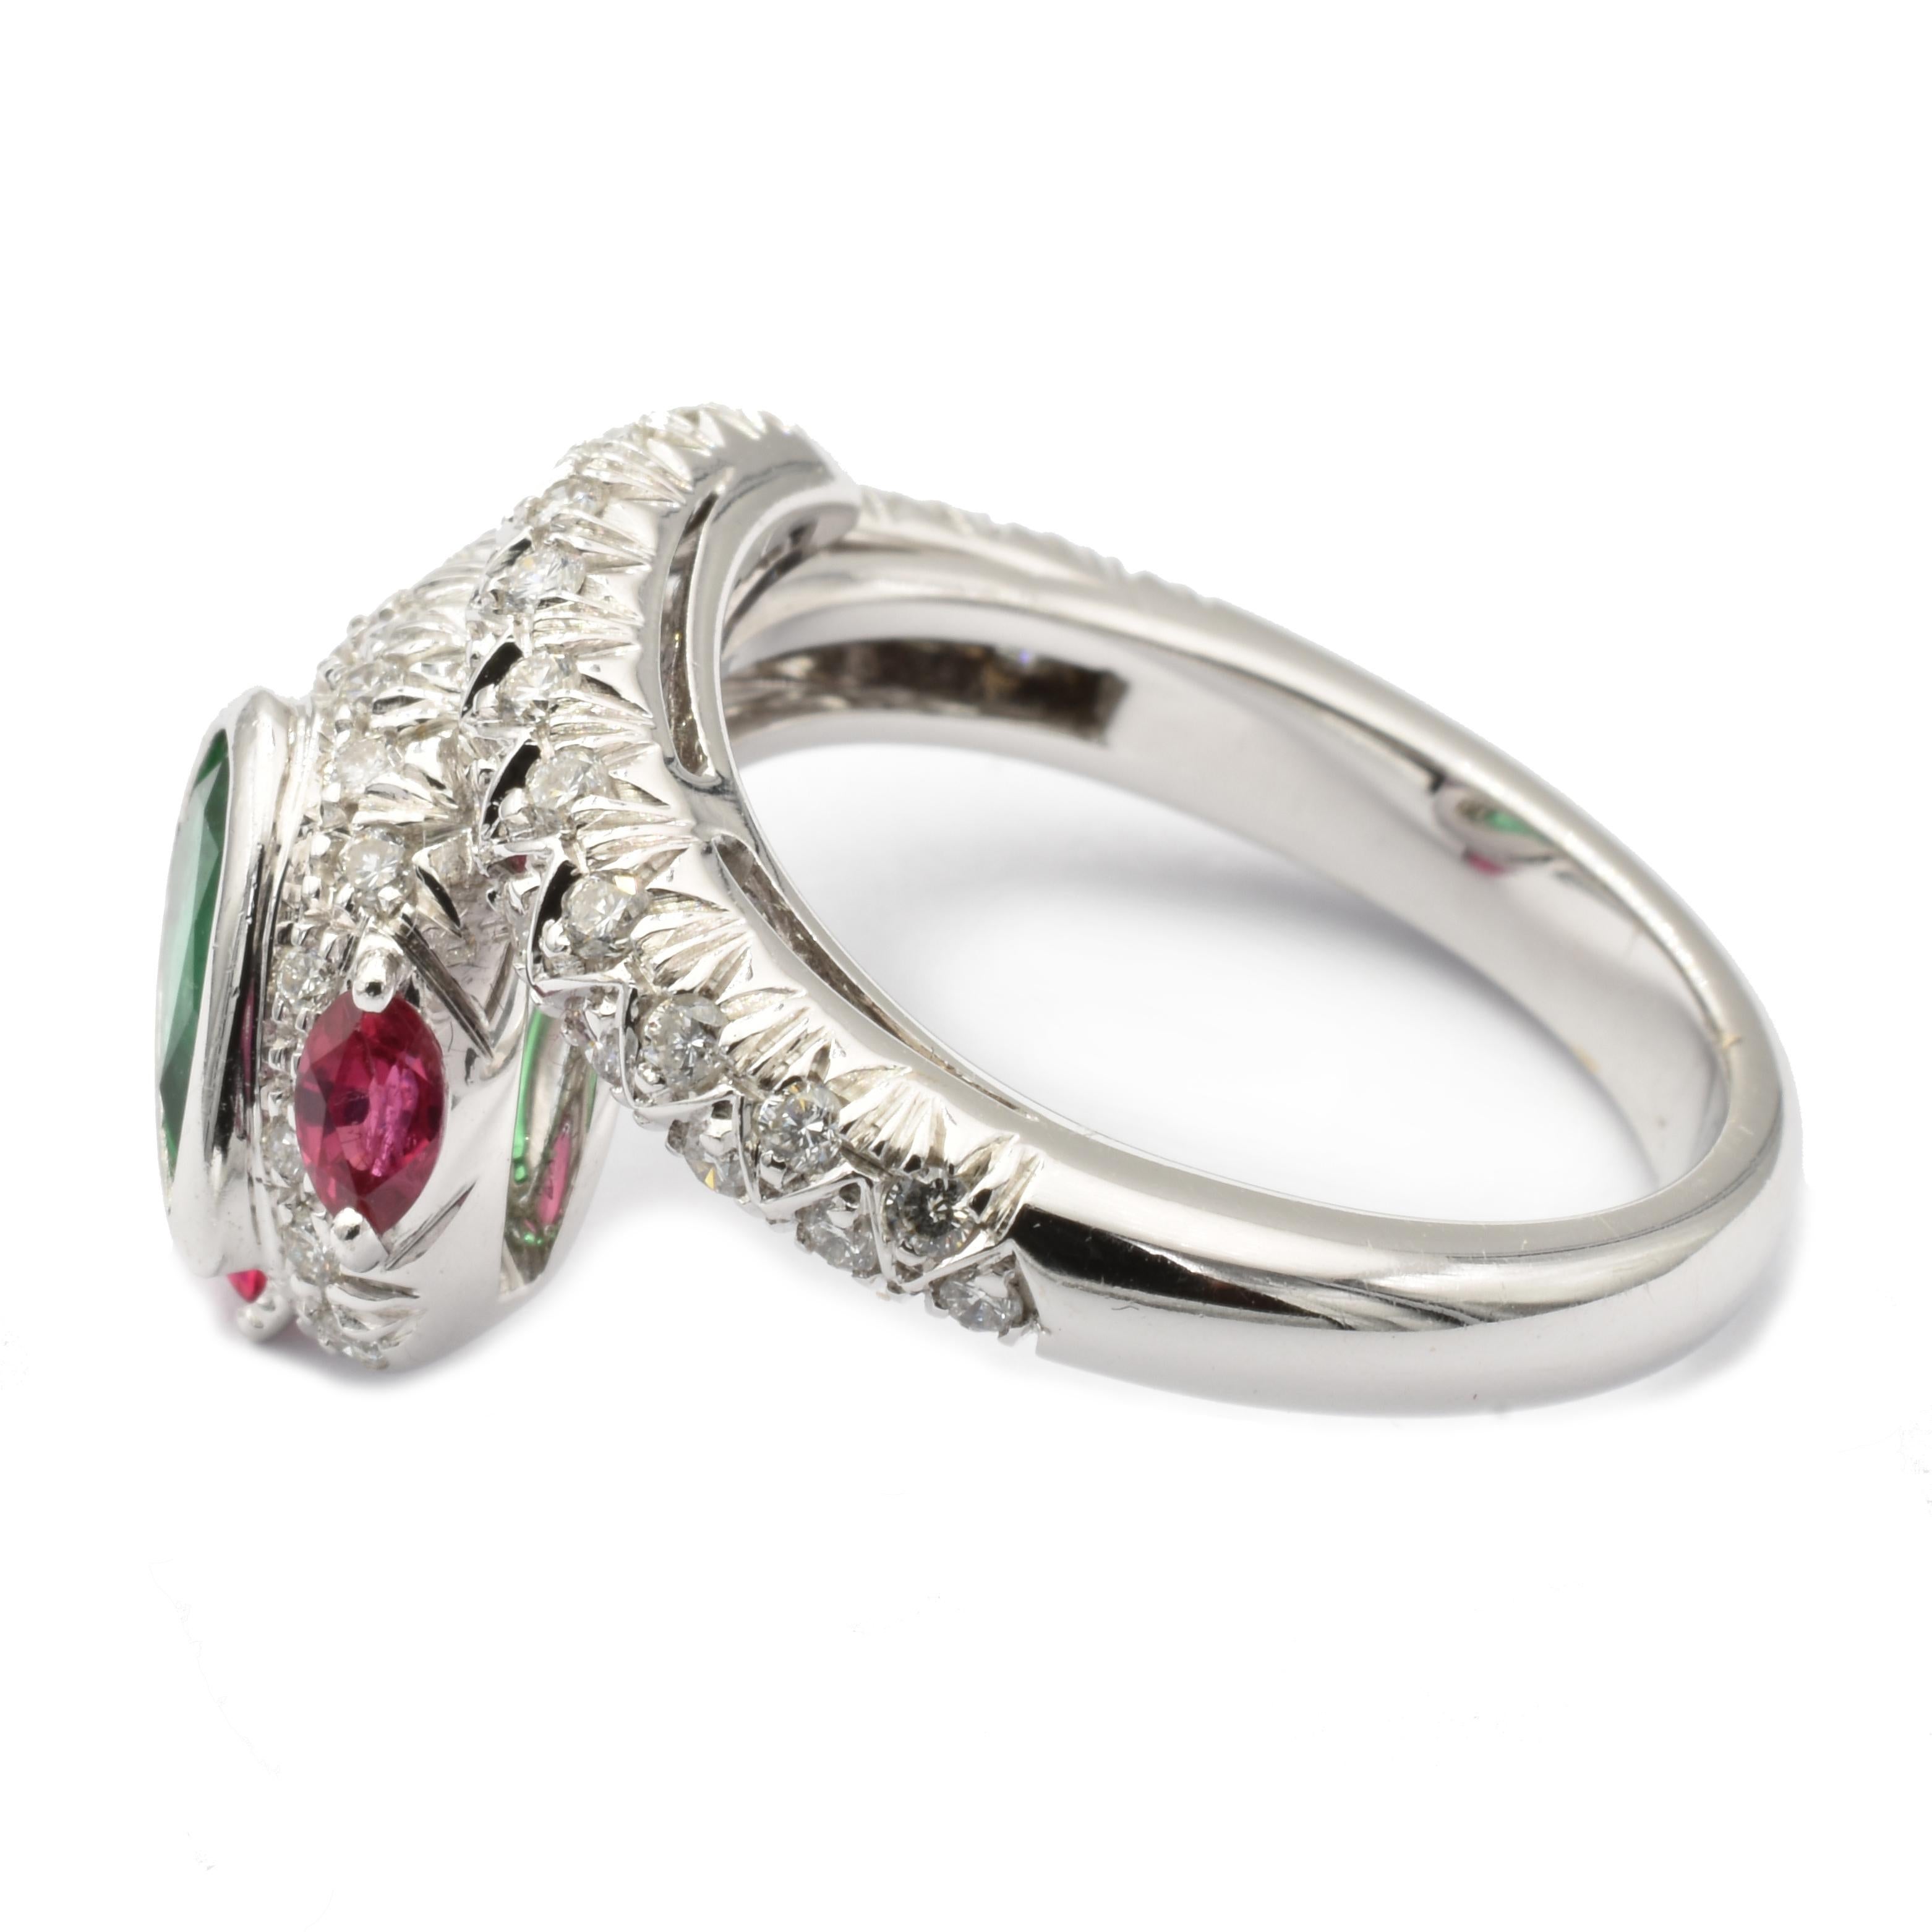 Gilberto Cassola 18Kt White Gold Snake Ring with a Pear Emerald, two Marquise Rubies and Diamonds.
Handmade in our Atelier in Valenza Italy.
Bright Green Natural Emerald Pear sized mm 7.80 X 4.20.  Weight ct 0.60
Intense Red Natural Ruby Marquises